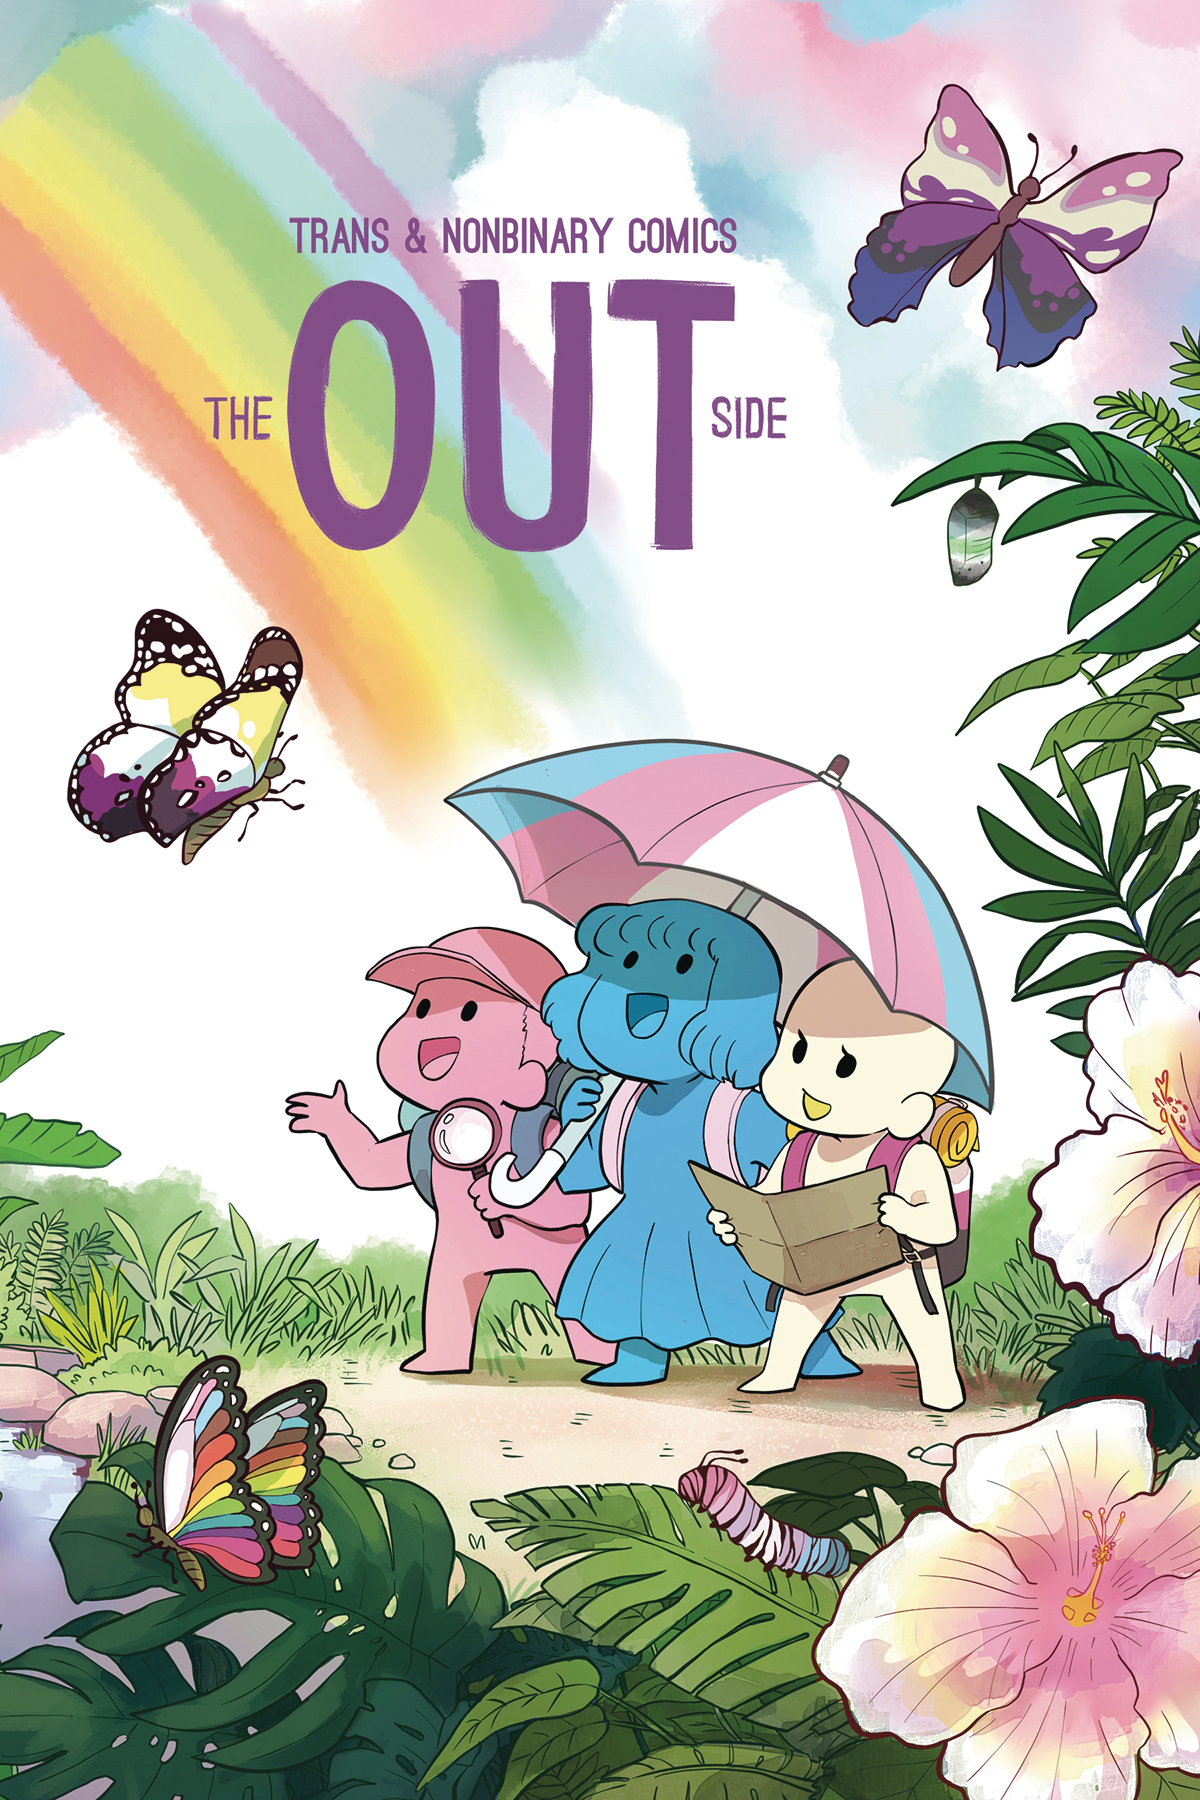 Out Side Trans & Nonbinary Comics Soft Cover